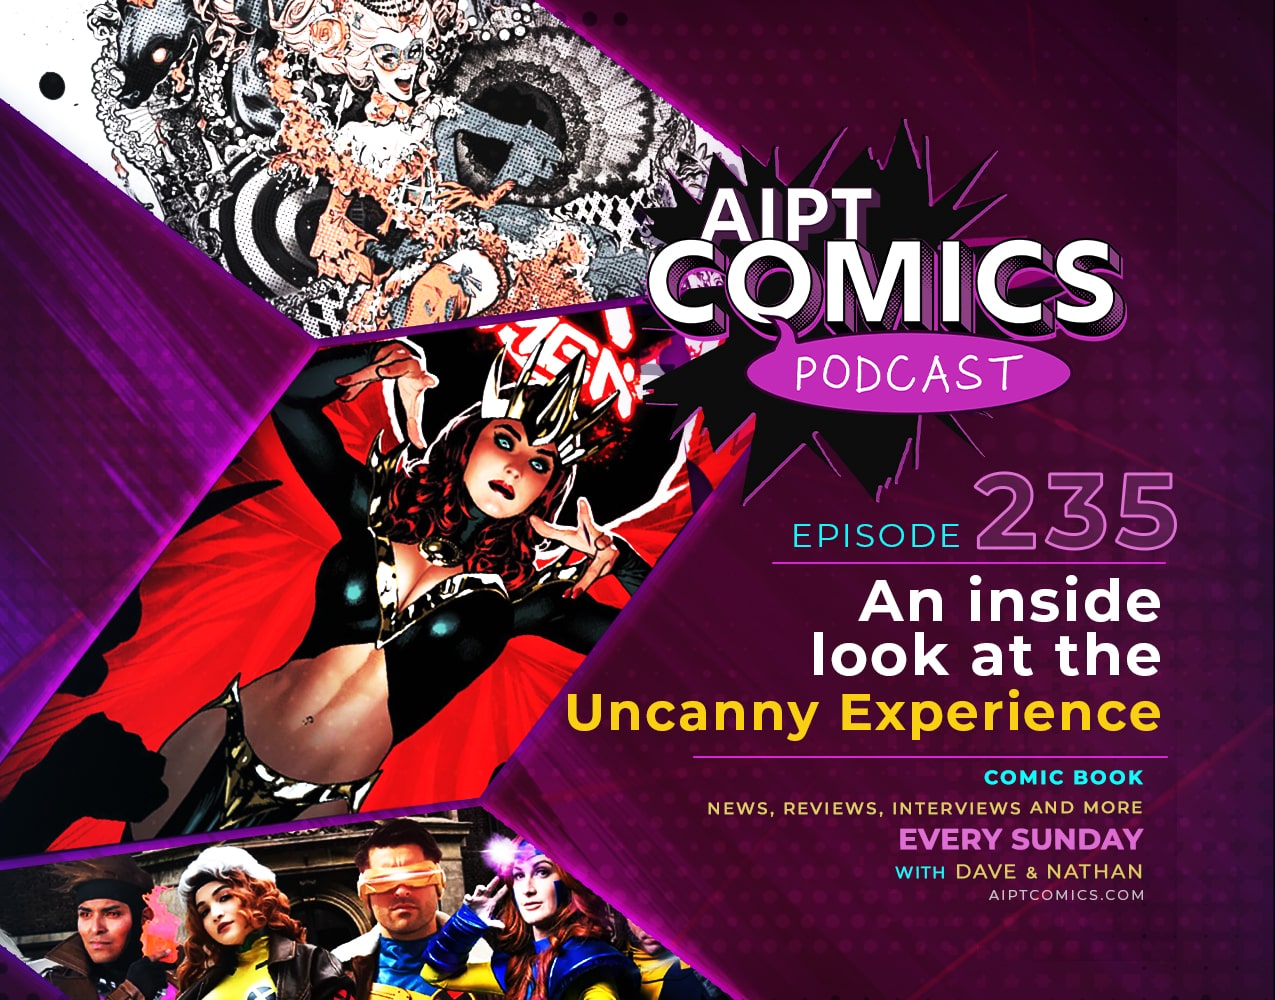 AIPT Comics Podcast episode 235: An inside look at the Uncanny Experience convention